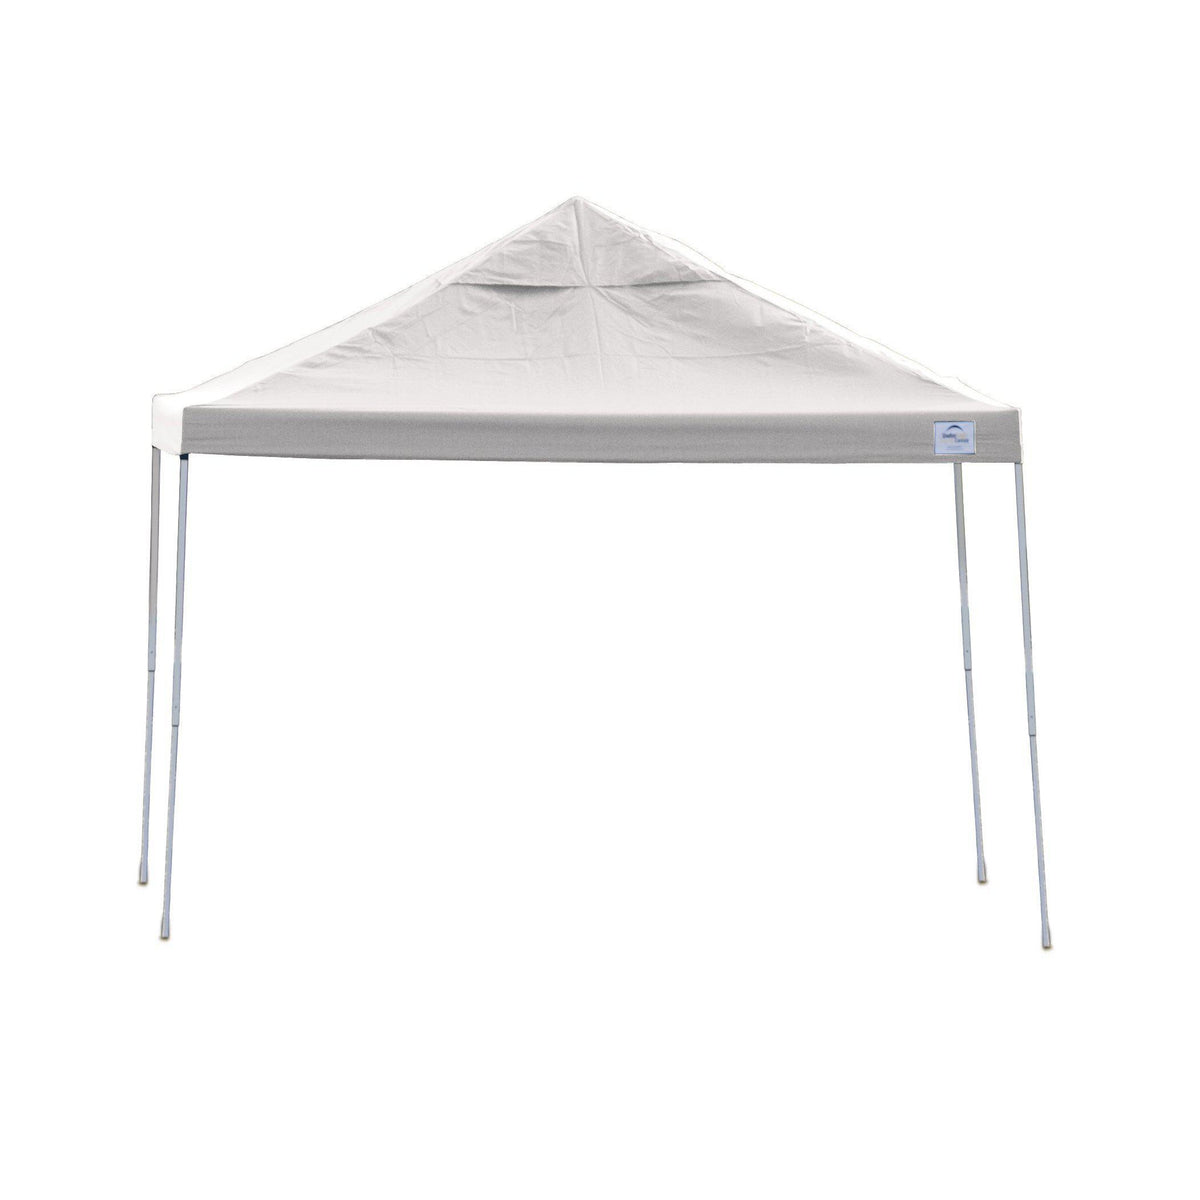 ShelterLogic Pro Series Straight Leg Pop-Up Canopy with Roller Bag